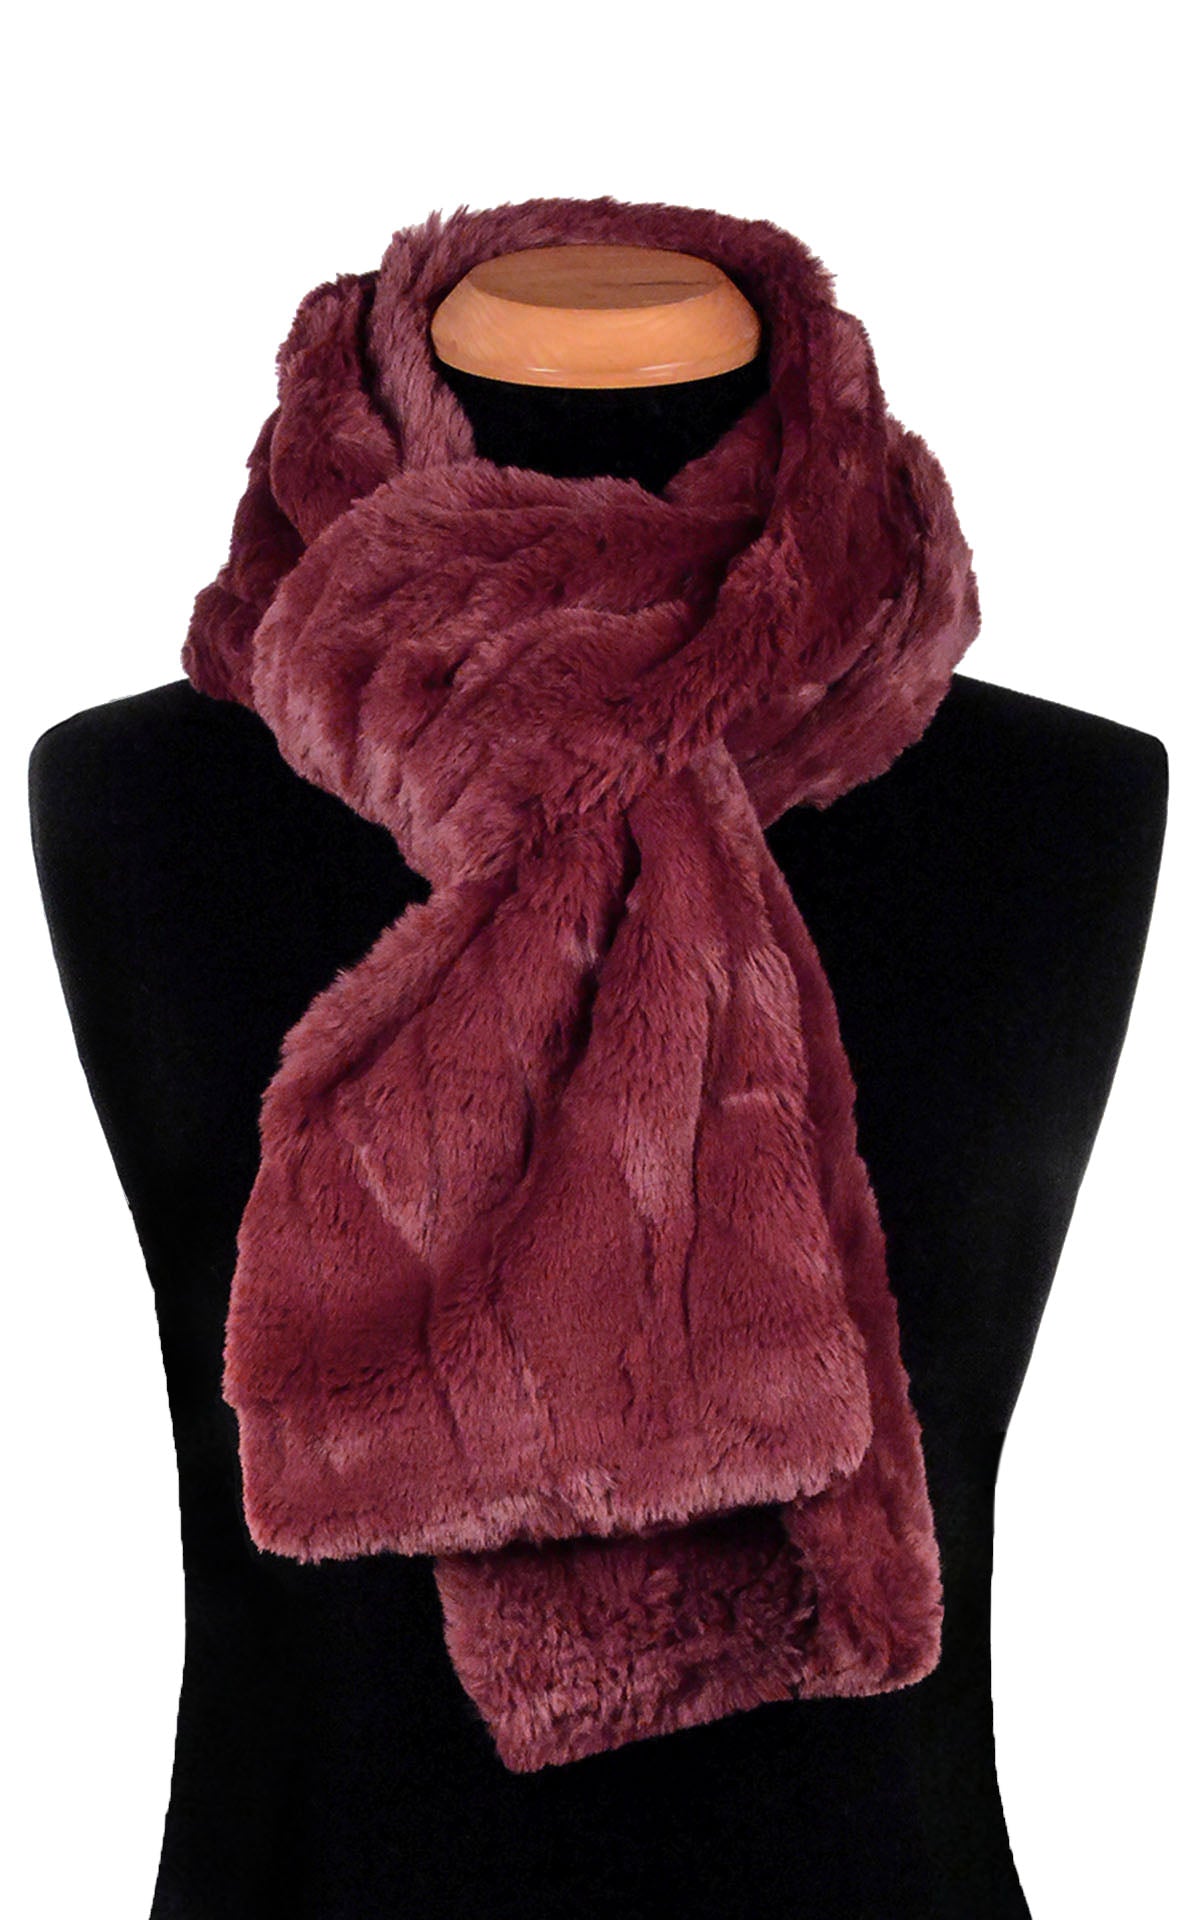 Men's Classic Scarf | Cranberry Creek Faux Fur | Handmade in the USA by Pandemonium Seattle